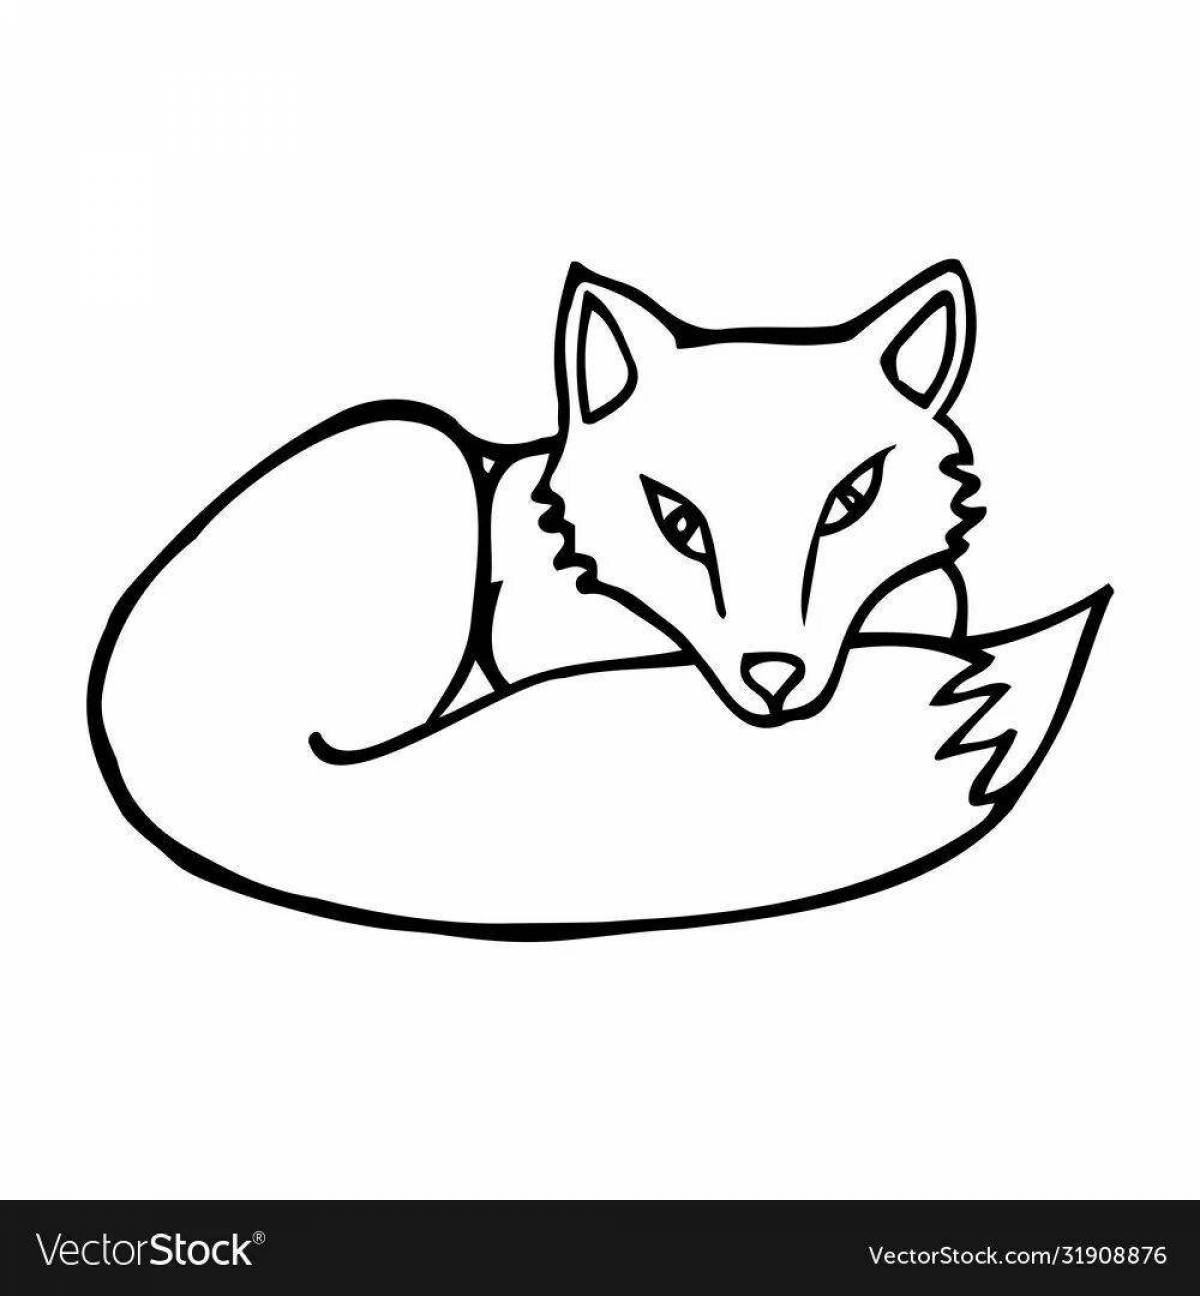 Coloring page adorable red foxes